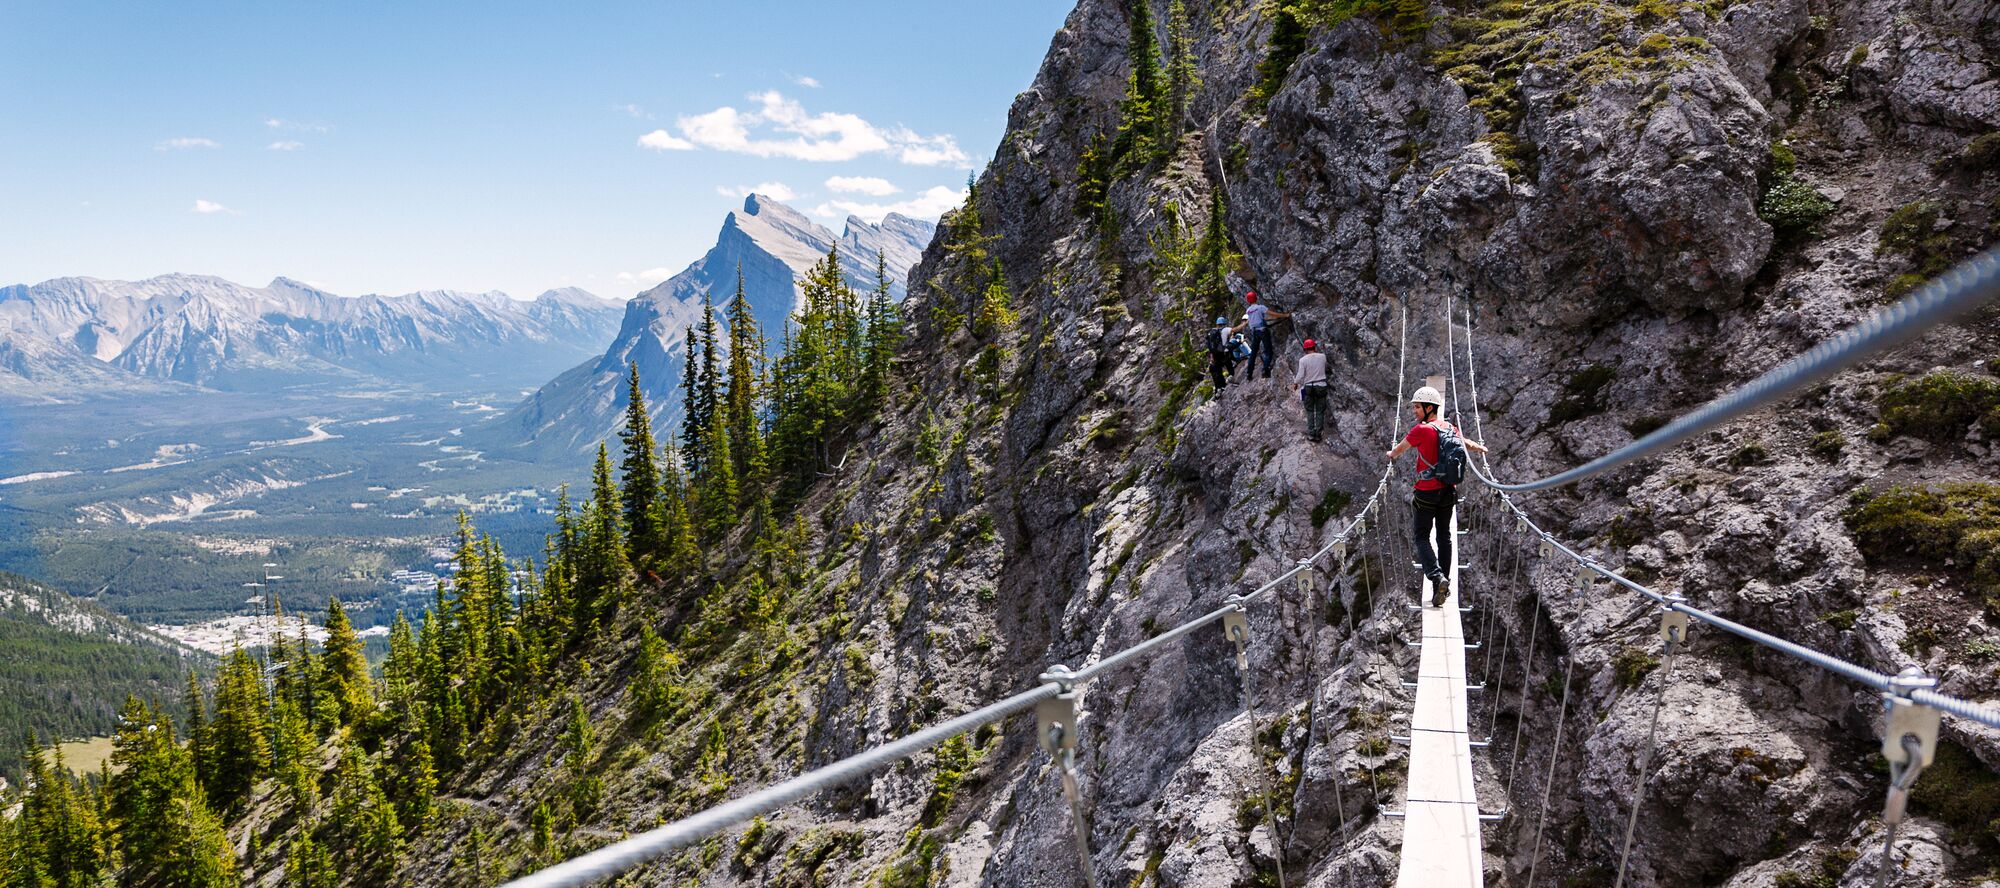 A climber crosses a suspension bridge towards a large mountain while overlooking the valley below at the Via Ferrata